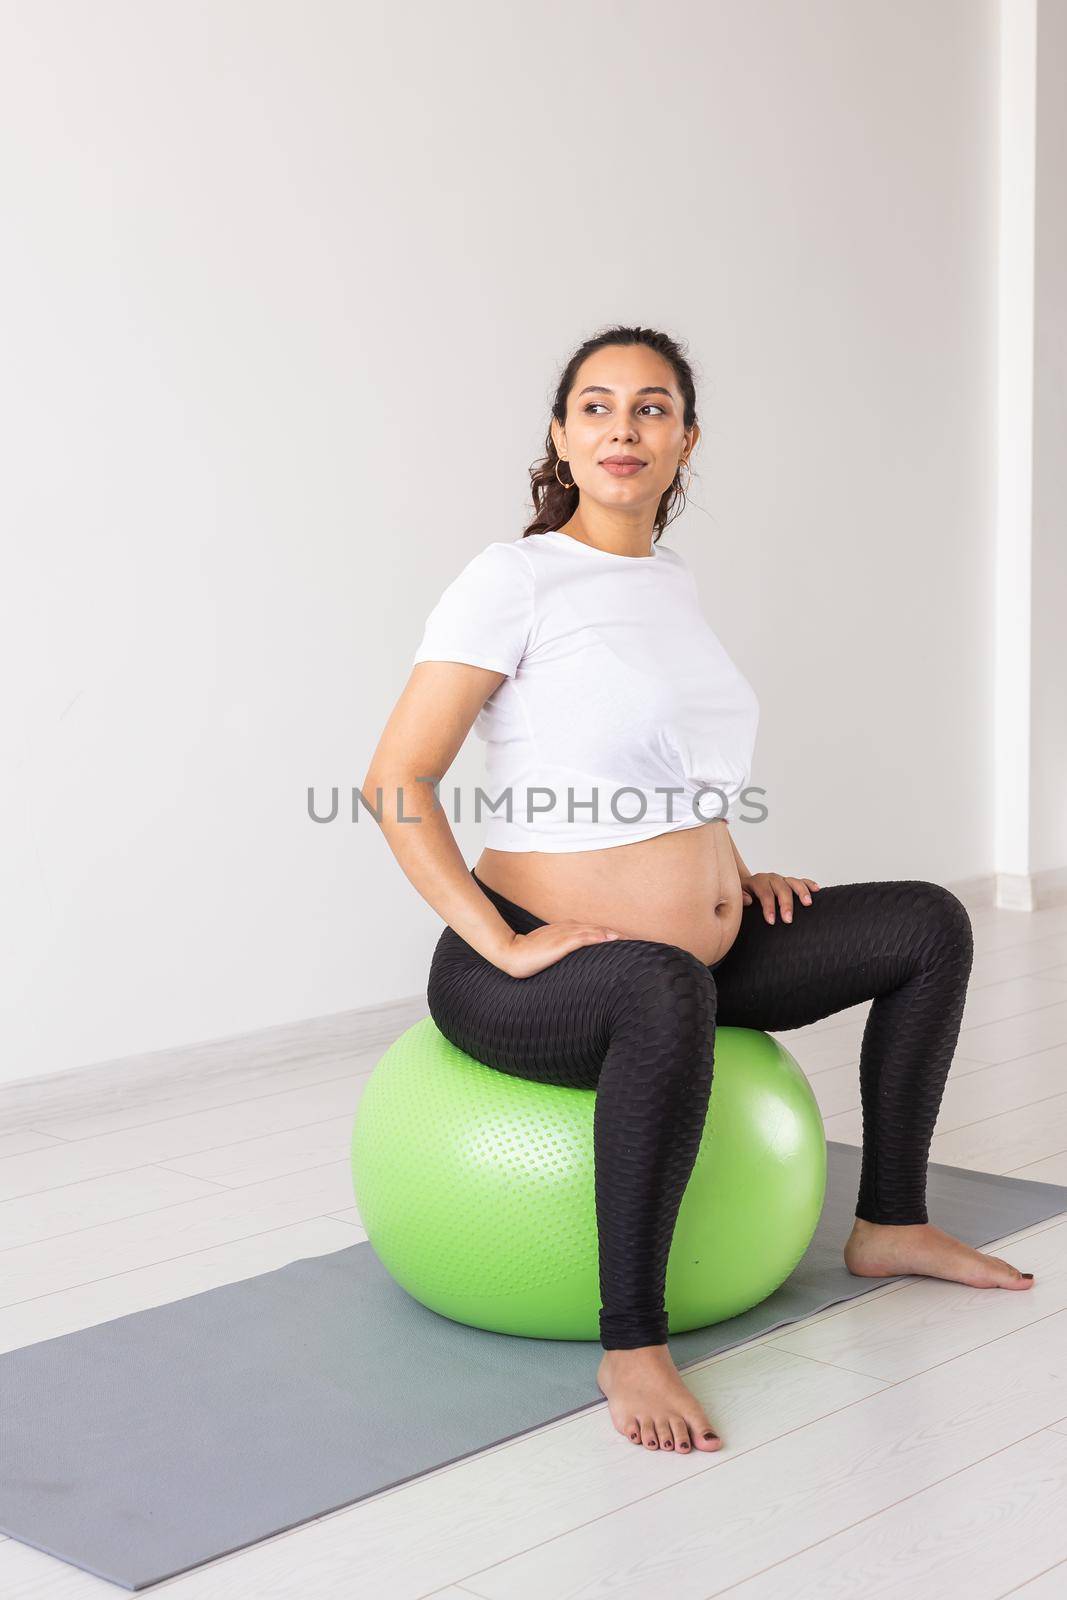 A young pregnant woman doing relaxation exercise using a fitness ball while sitting on a mat. by Satura86